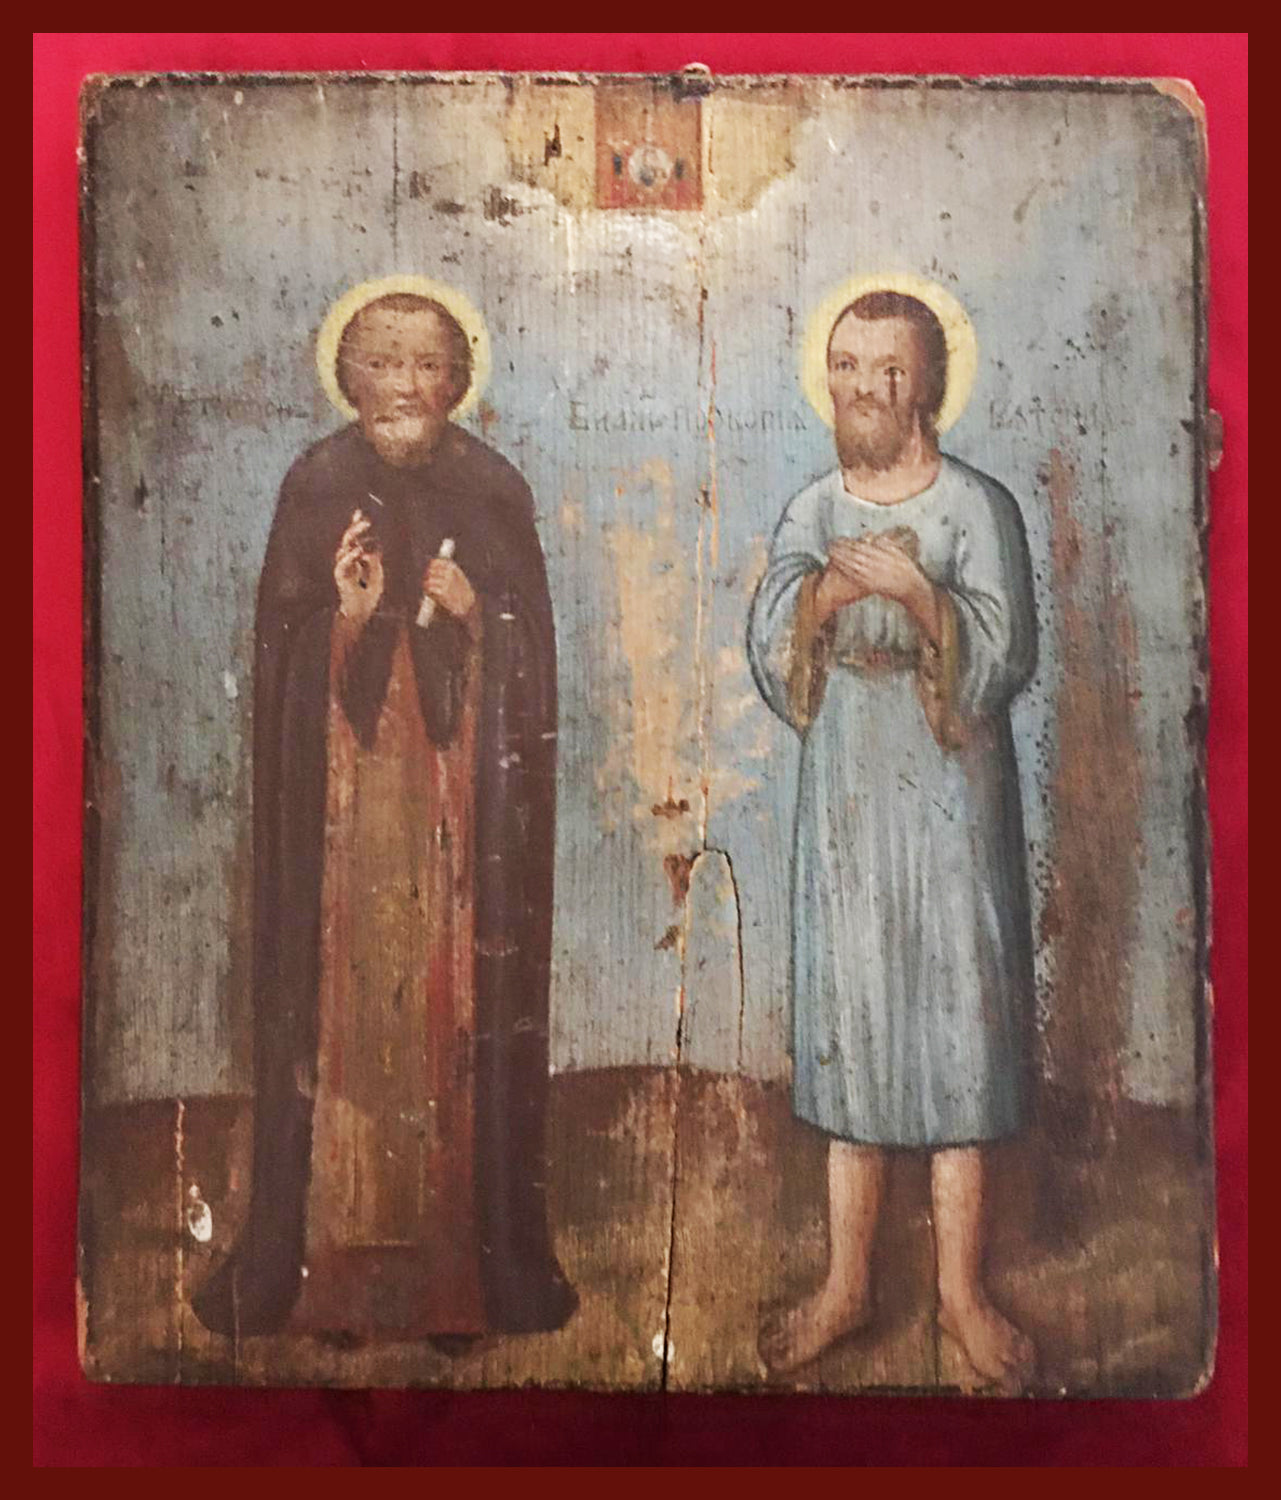 Sts. Procopius and Monastic (unknown)